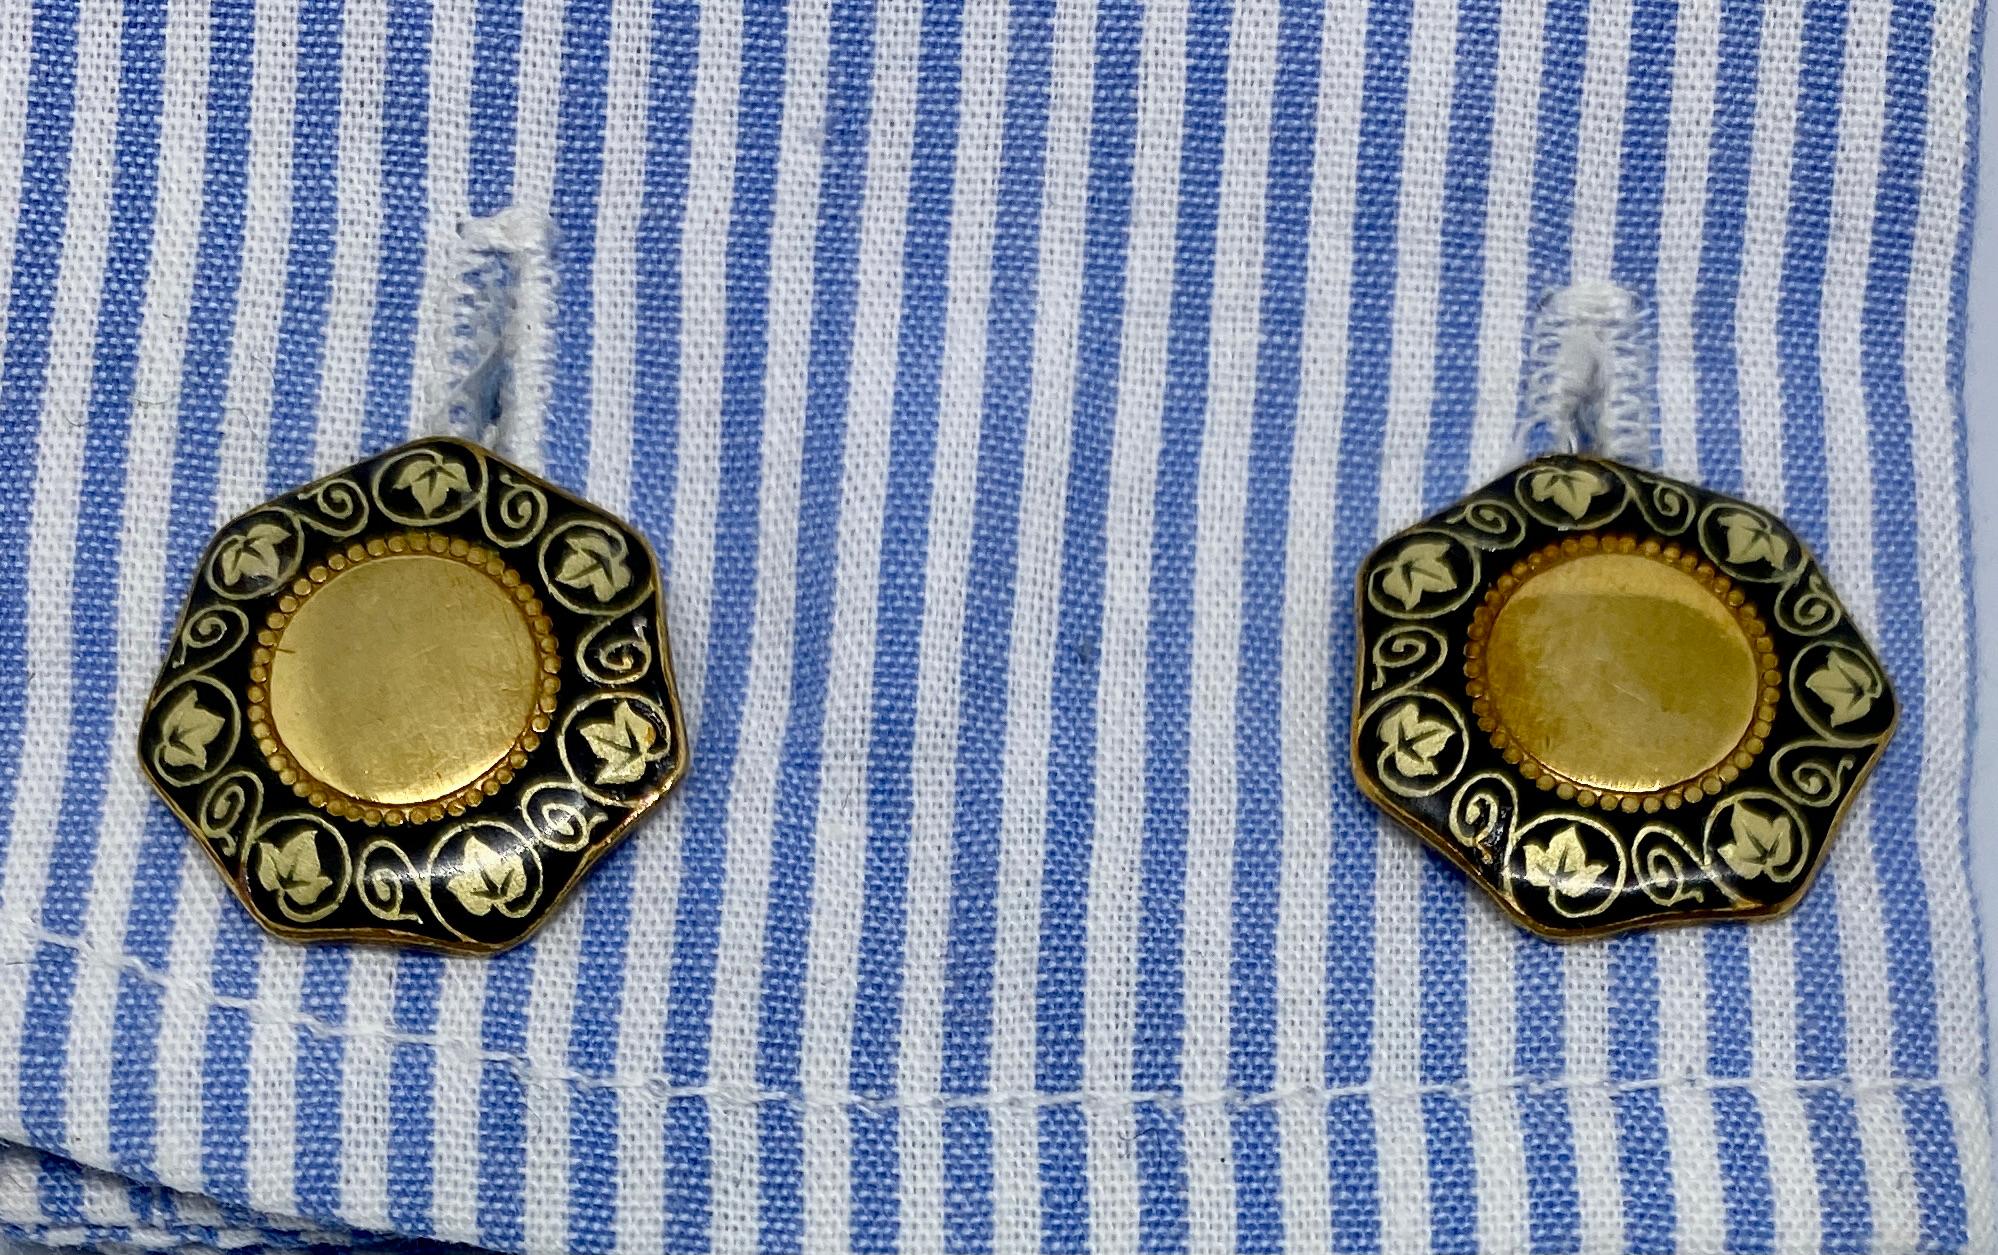 An exceptional pair of double-sided cufflinks in the Italia Liberty taste, as the Art Nouveau movement was known in Italy. The unusual, heptagonal (7-sided) faces feature black and pale green enamel borders depicting ivy vines and leaves. 

These